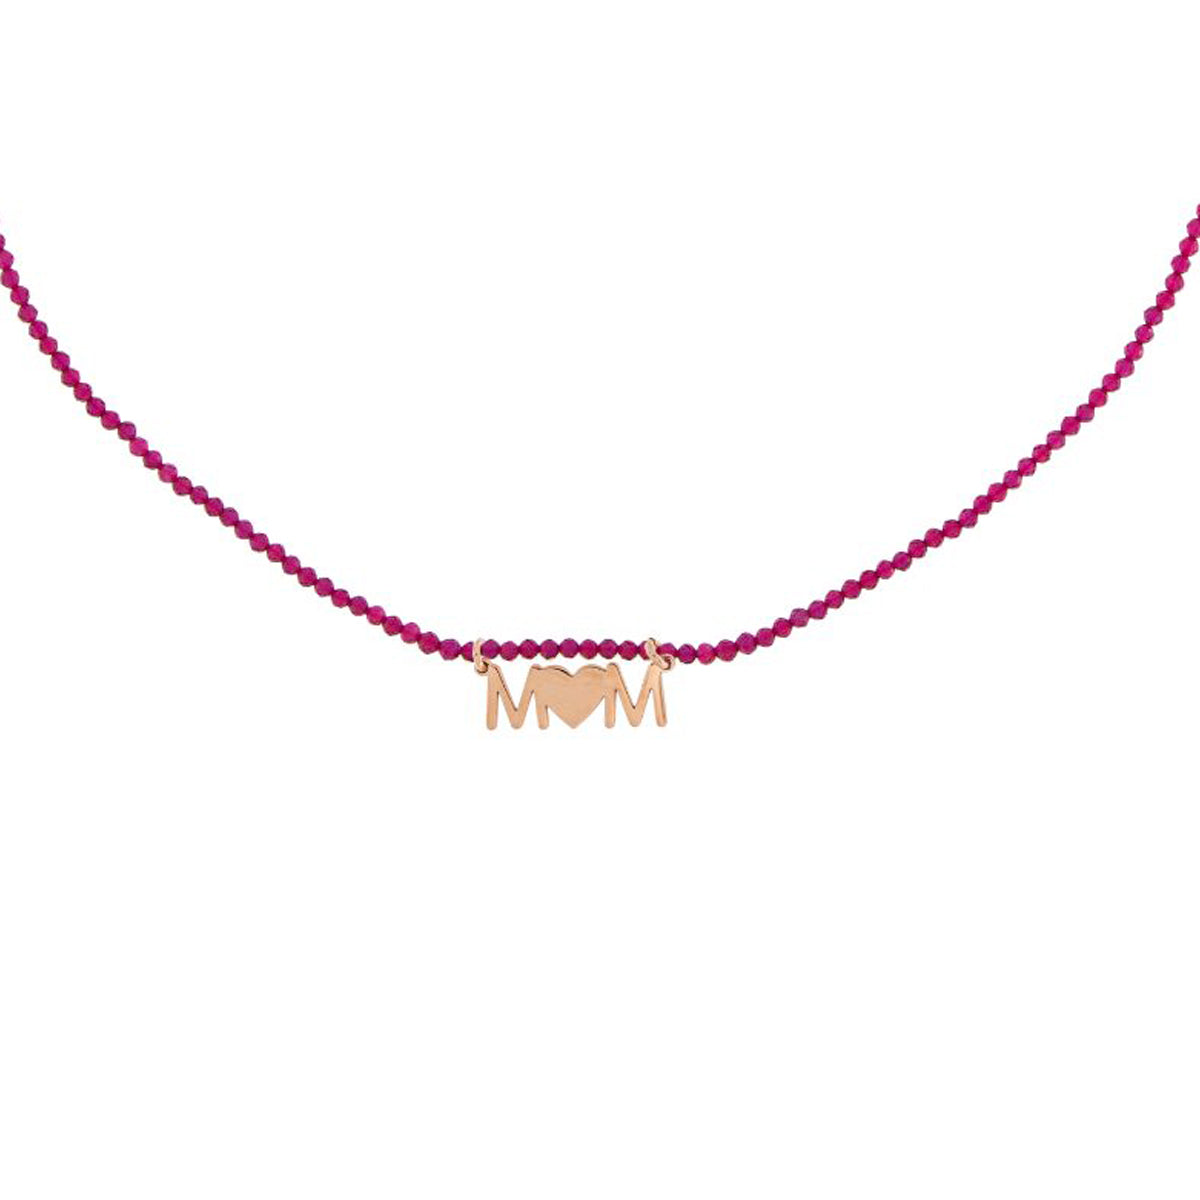 Chokers - Necklace With Colored Gemstones - MOM - 1 | Rue des Mille